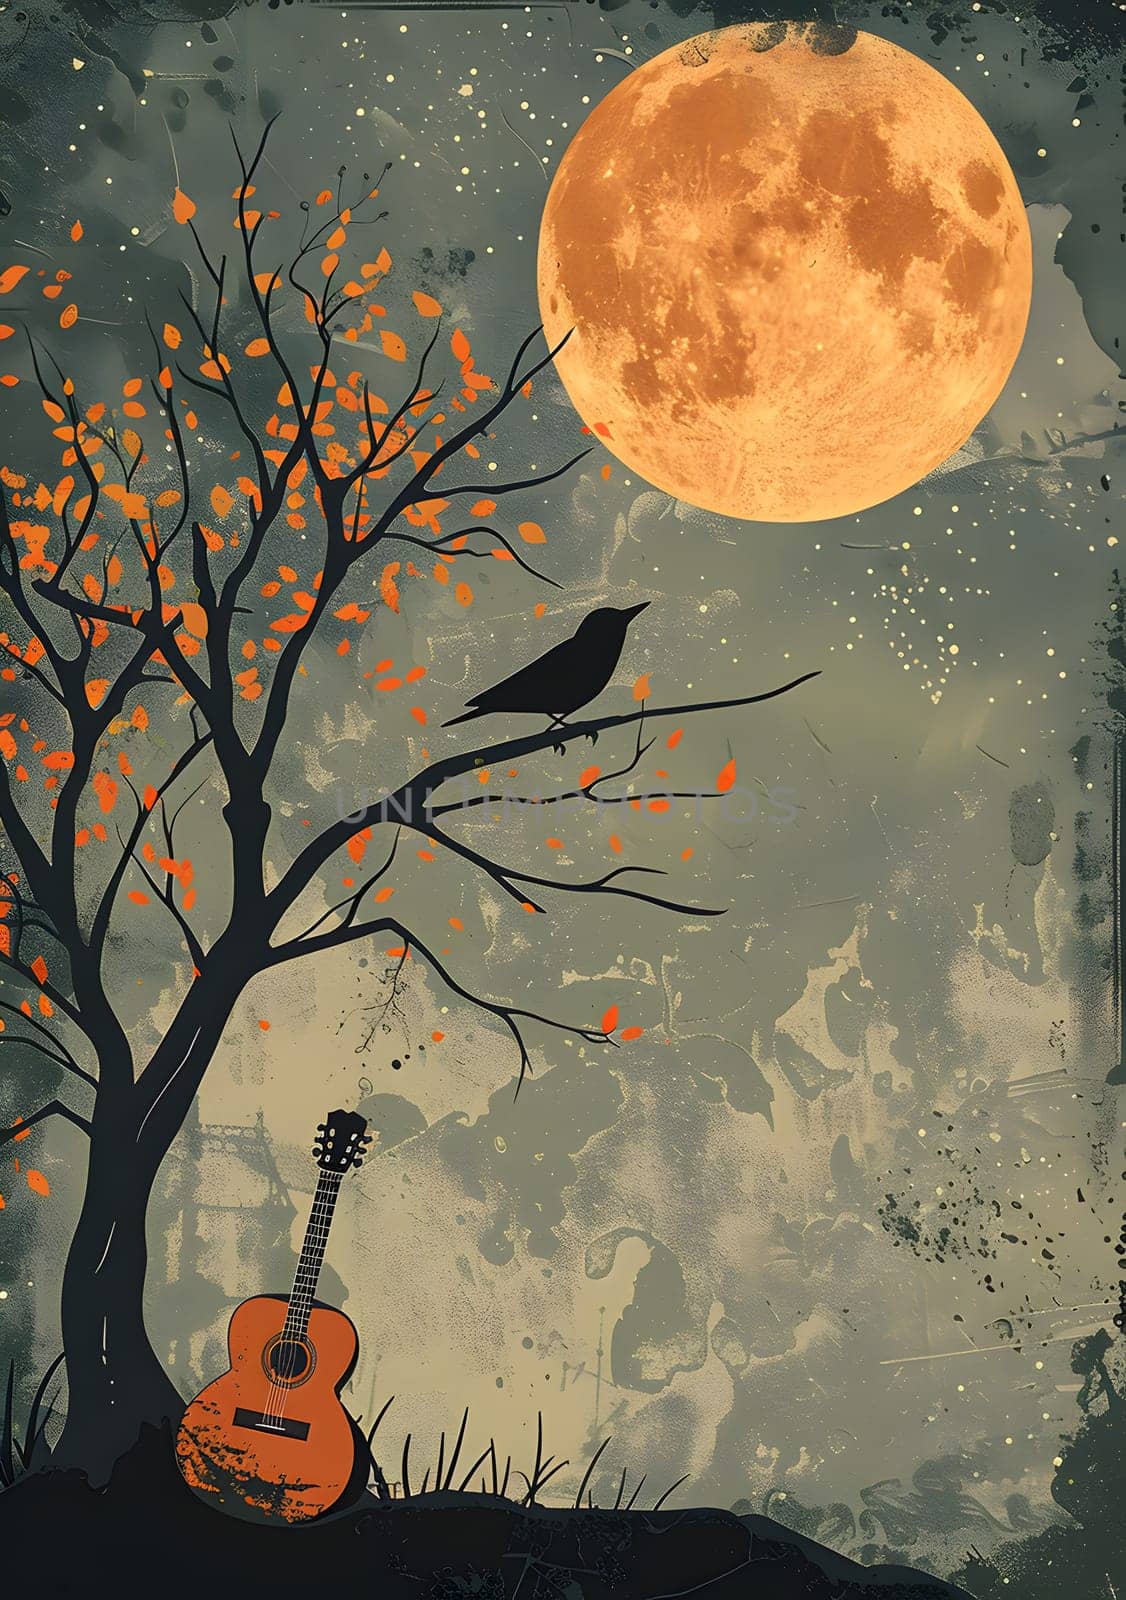 A guitar rests under a tree with a full moon painting the world orange by Nadtochiy